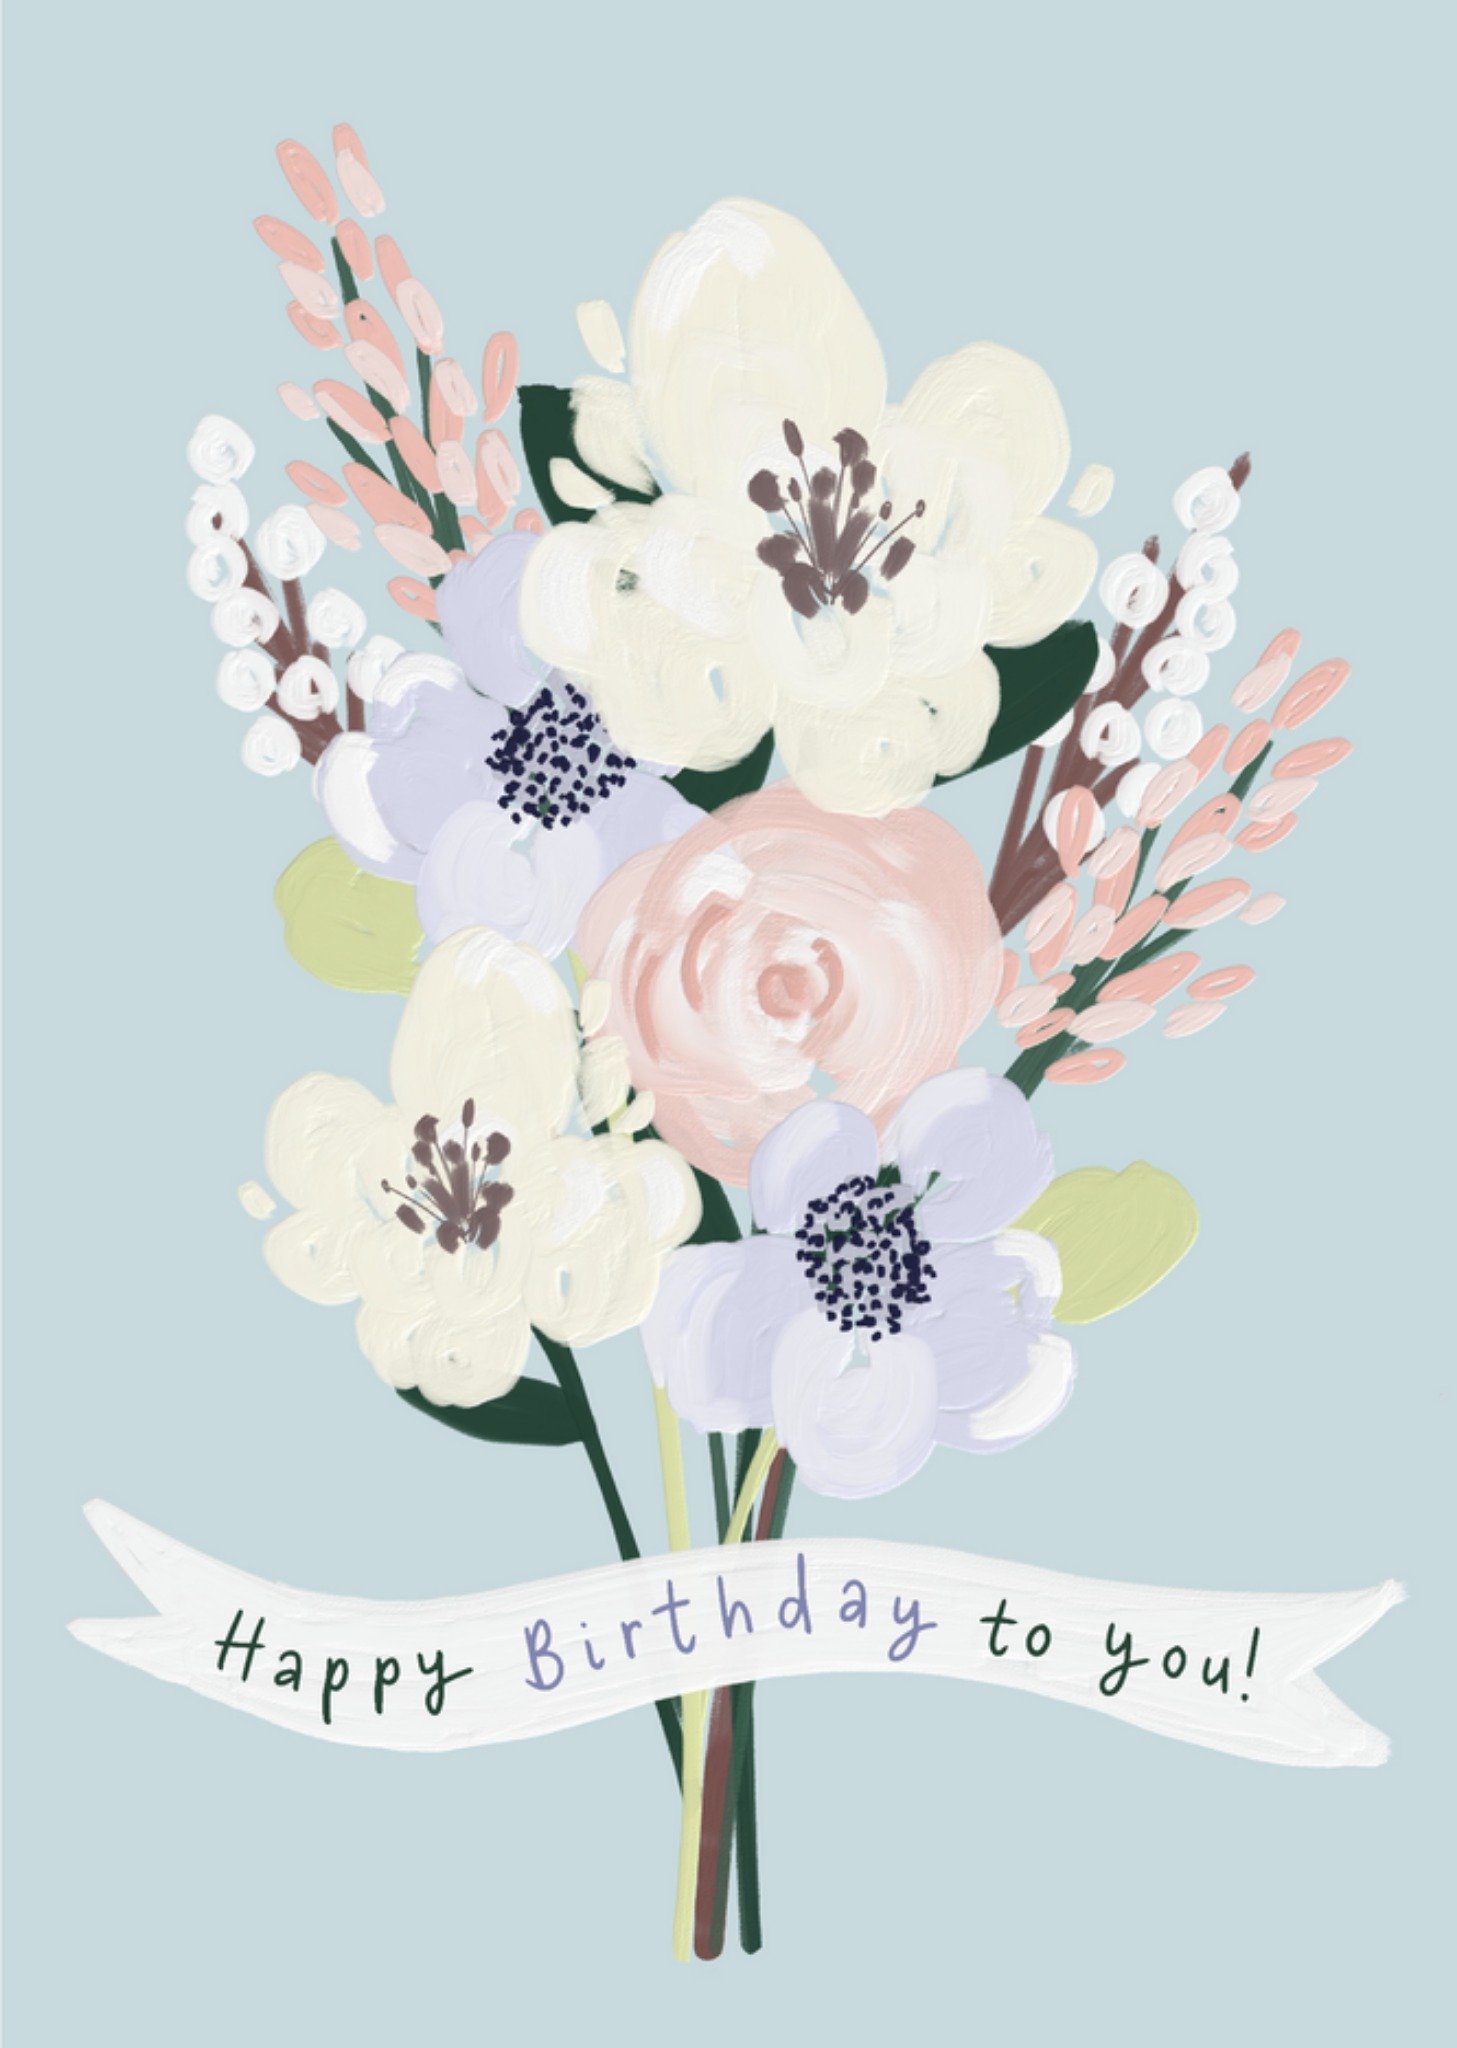 Moonpig Sweet Happy Birthday To You Hand Painted Bouquet Of Flowers Birthday Card Ecard